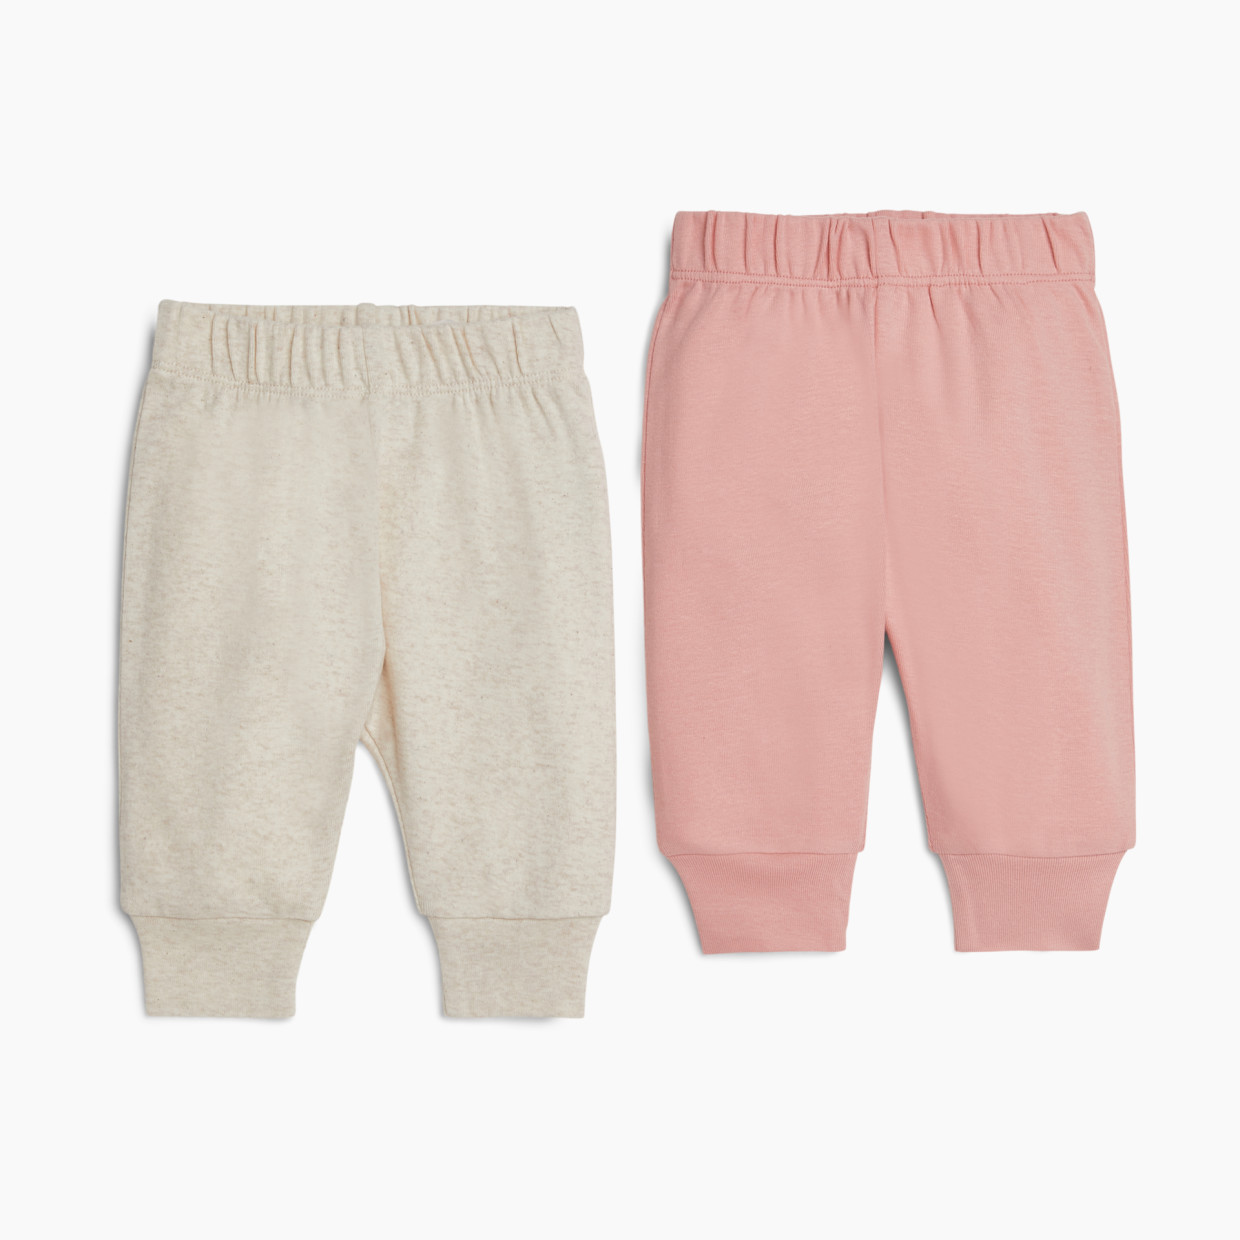 Small Story Pants (2 Pack) - Pink/Oatmeal, 0-3 M.